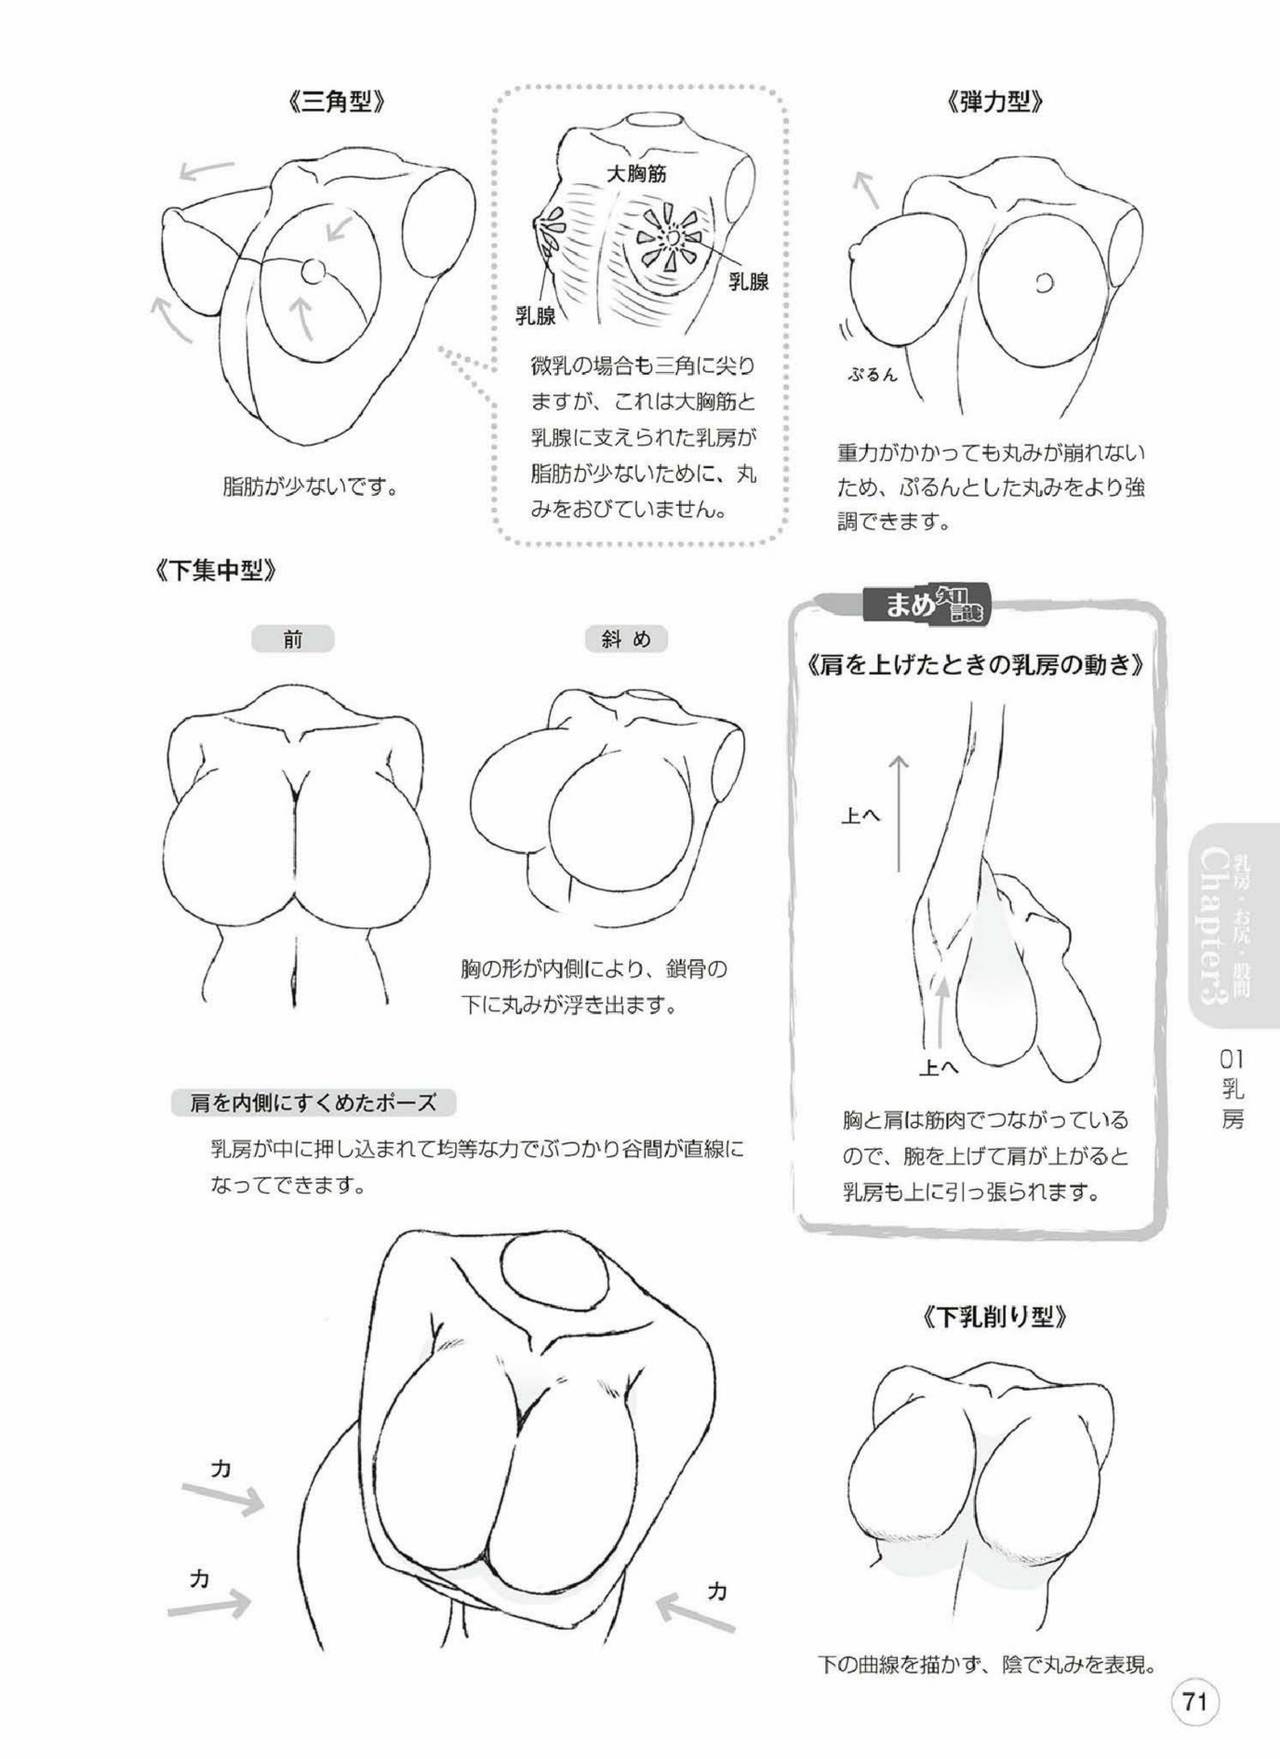 How to draw a human body part of a girl - Sexyly attractive! 71